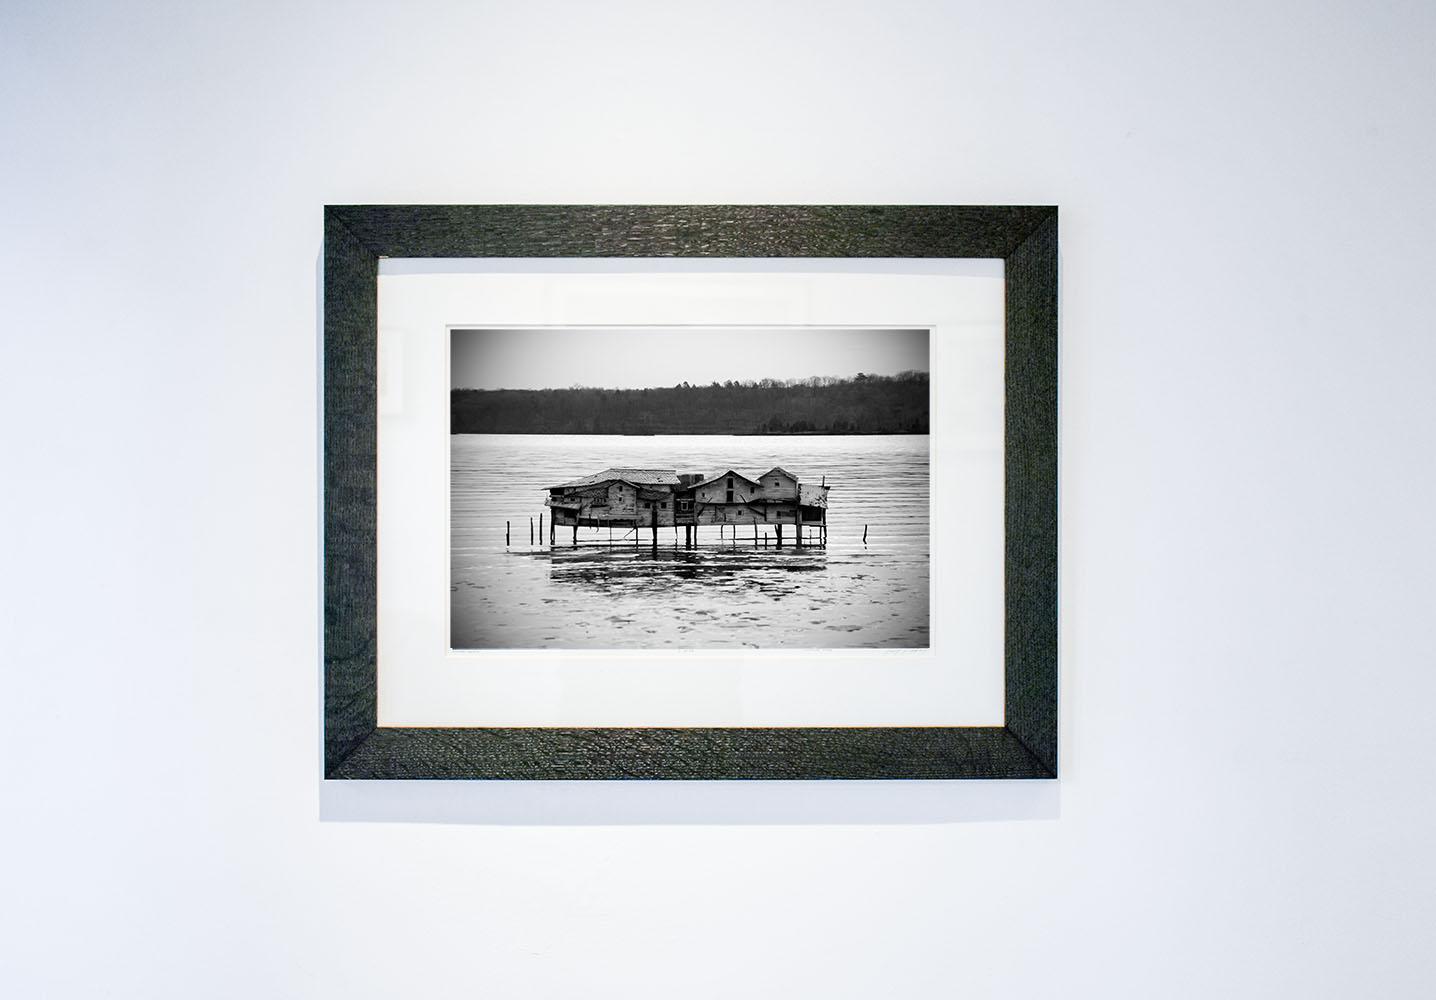 Mudflat House (Black & White Landscape Photograph of a House in Water) 5